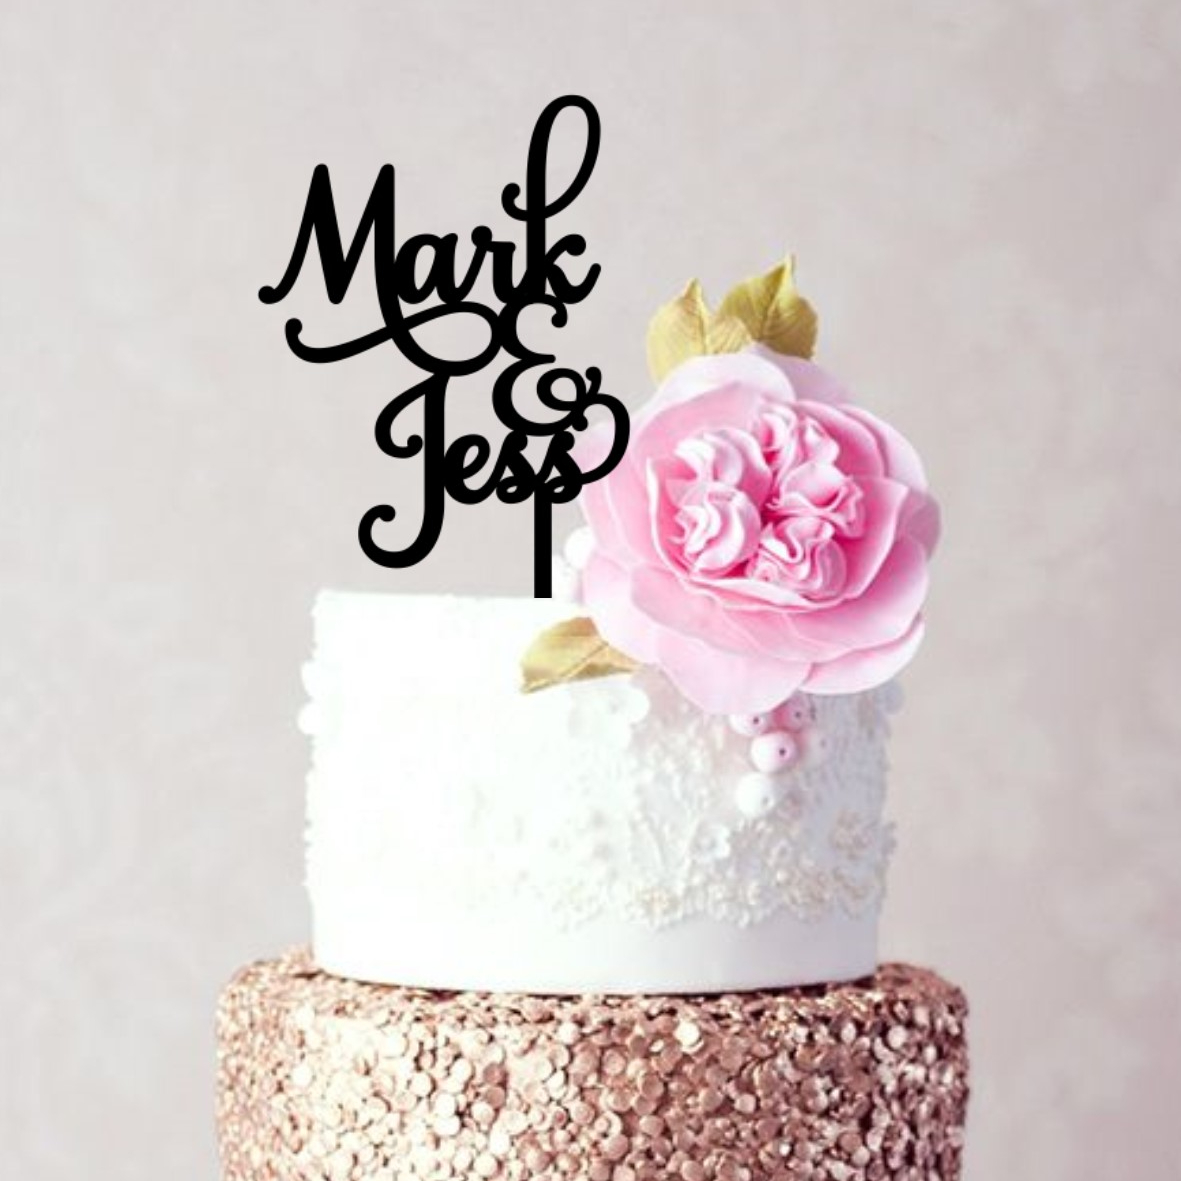 Quick Creations Cake Topper - Mark & Jess